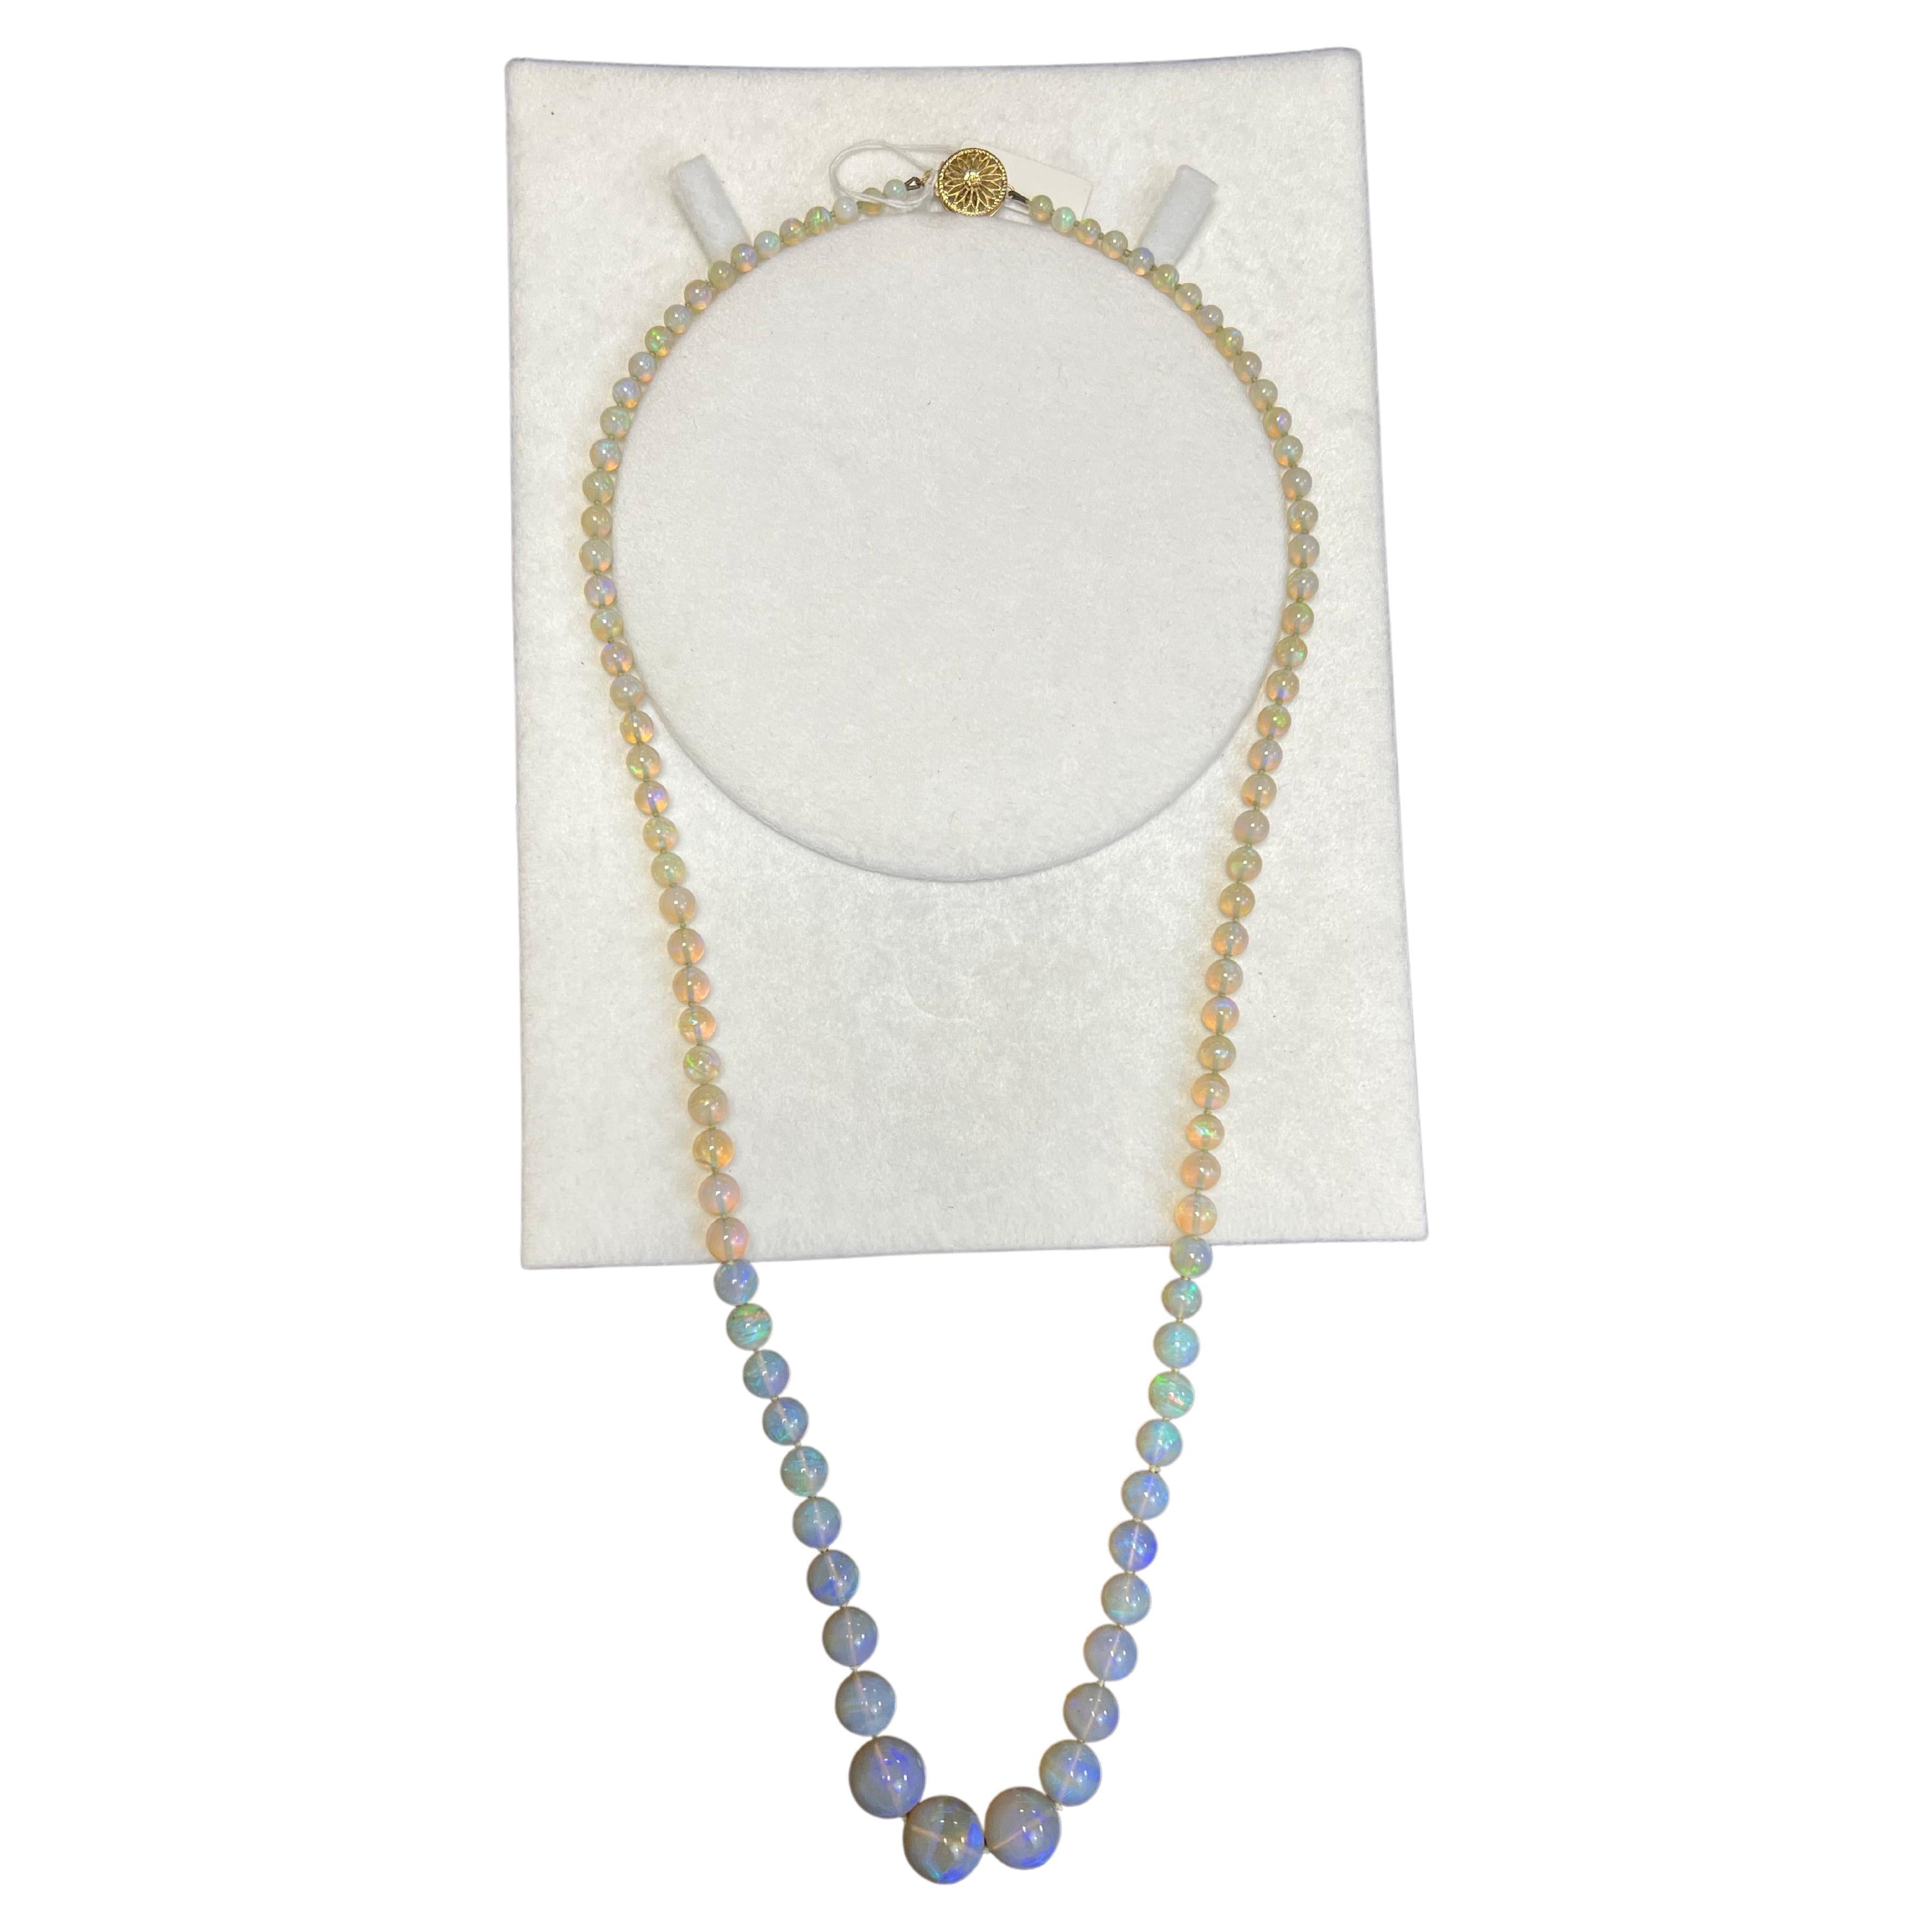 Lady's Crystal Opal Graduated Beads Necklace with 14K Yellow Gold 